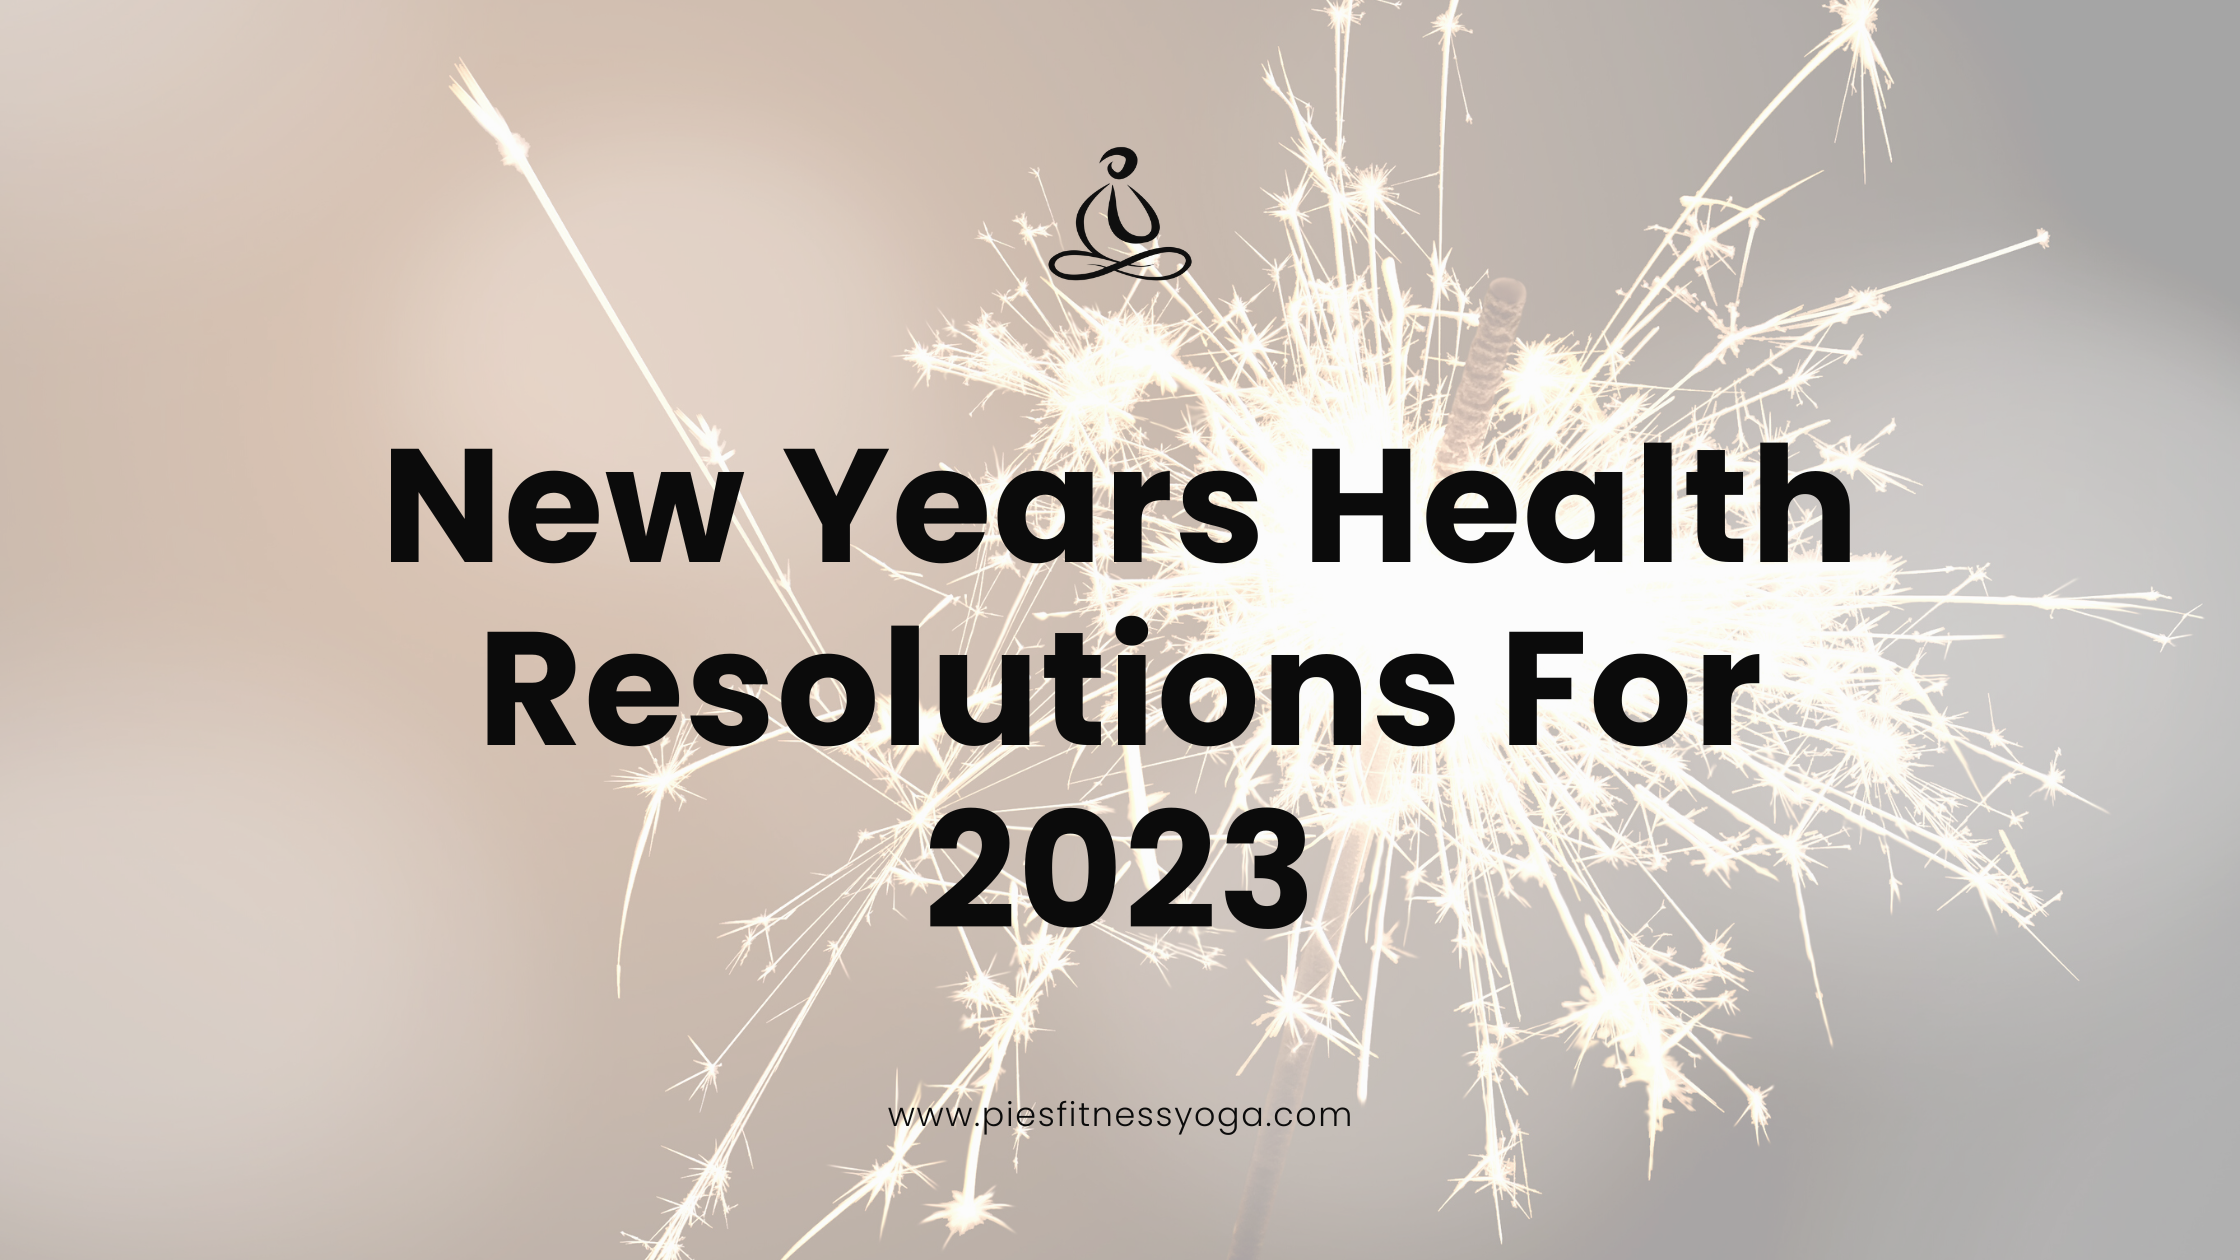 New Year’s Health Resolutions for 2023